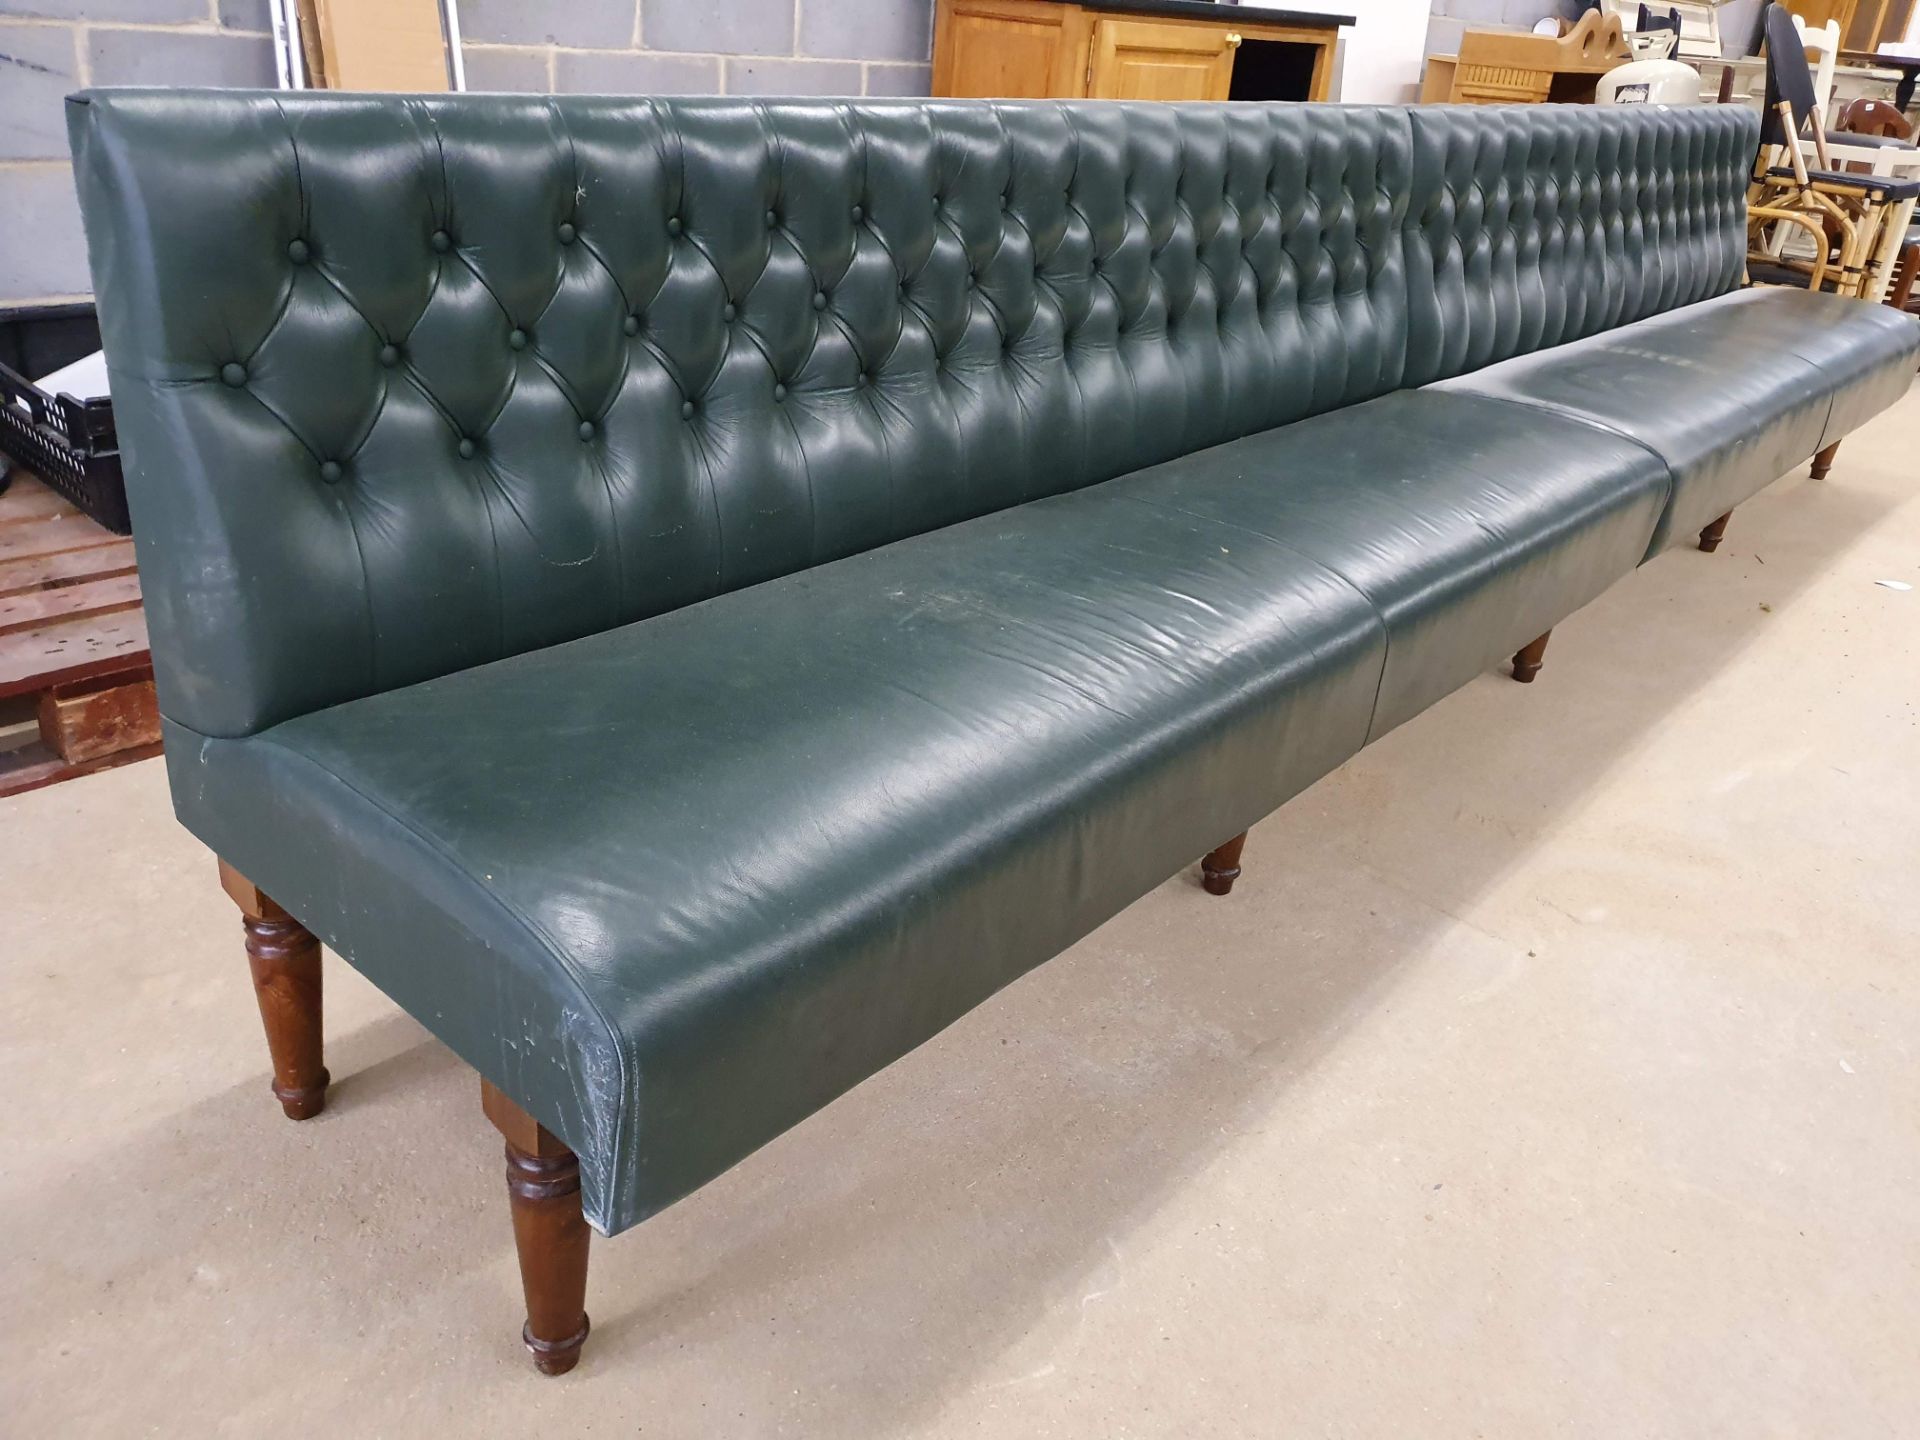 1 x Restaurant Seating Bench Upholstery in Green With Studded Back and Oak Turned Legs - H91 - Image 6 of 10